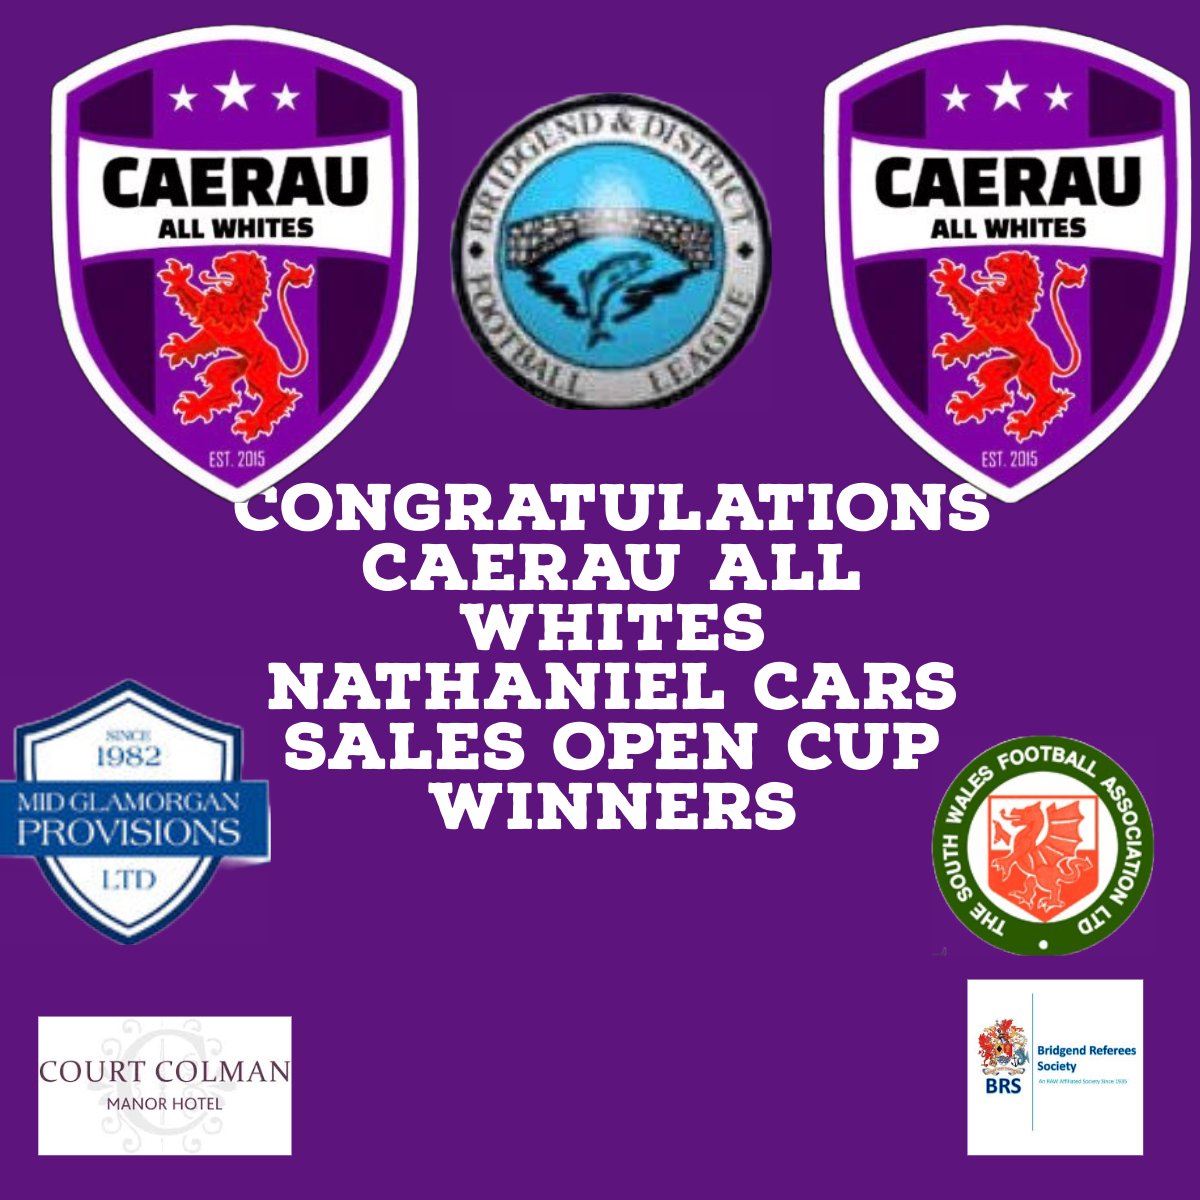 Congratulations @CaerauAW on winning the @NathanielCars open cup to complete the treble.🏆🏆🏆 Enjoy your night 🍻🍻🍻 good luck in the @SWALInfo @wales_league @SouthWalesFA @AllWalesSport @BridgendReferee